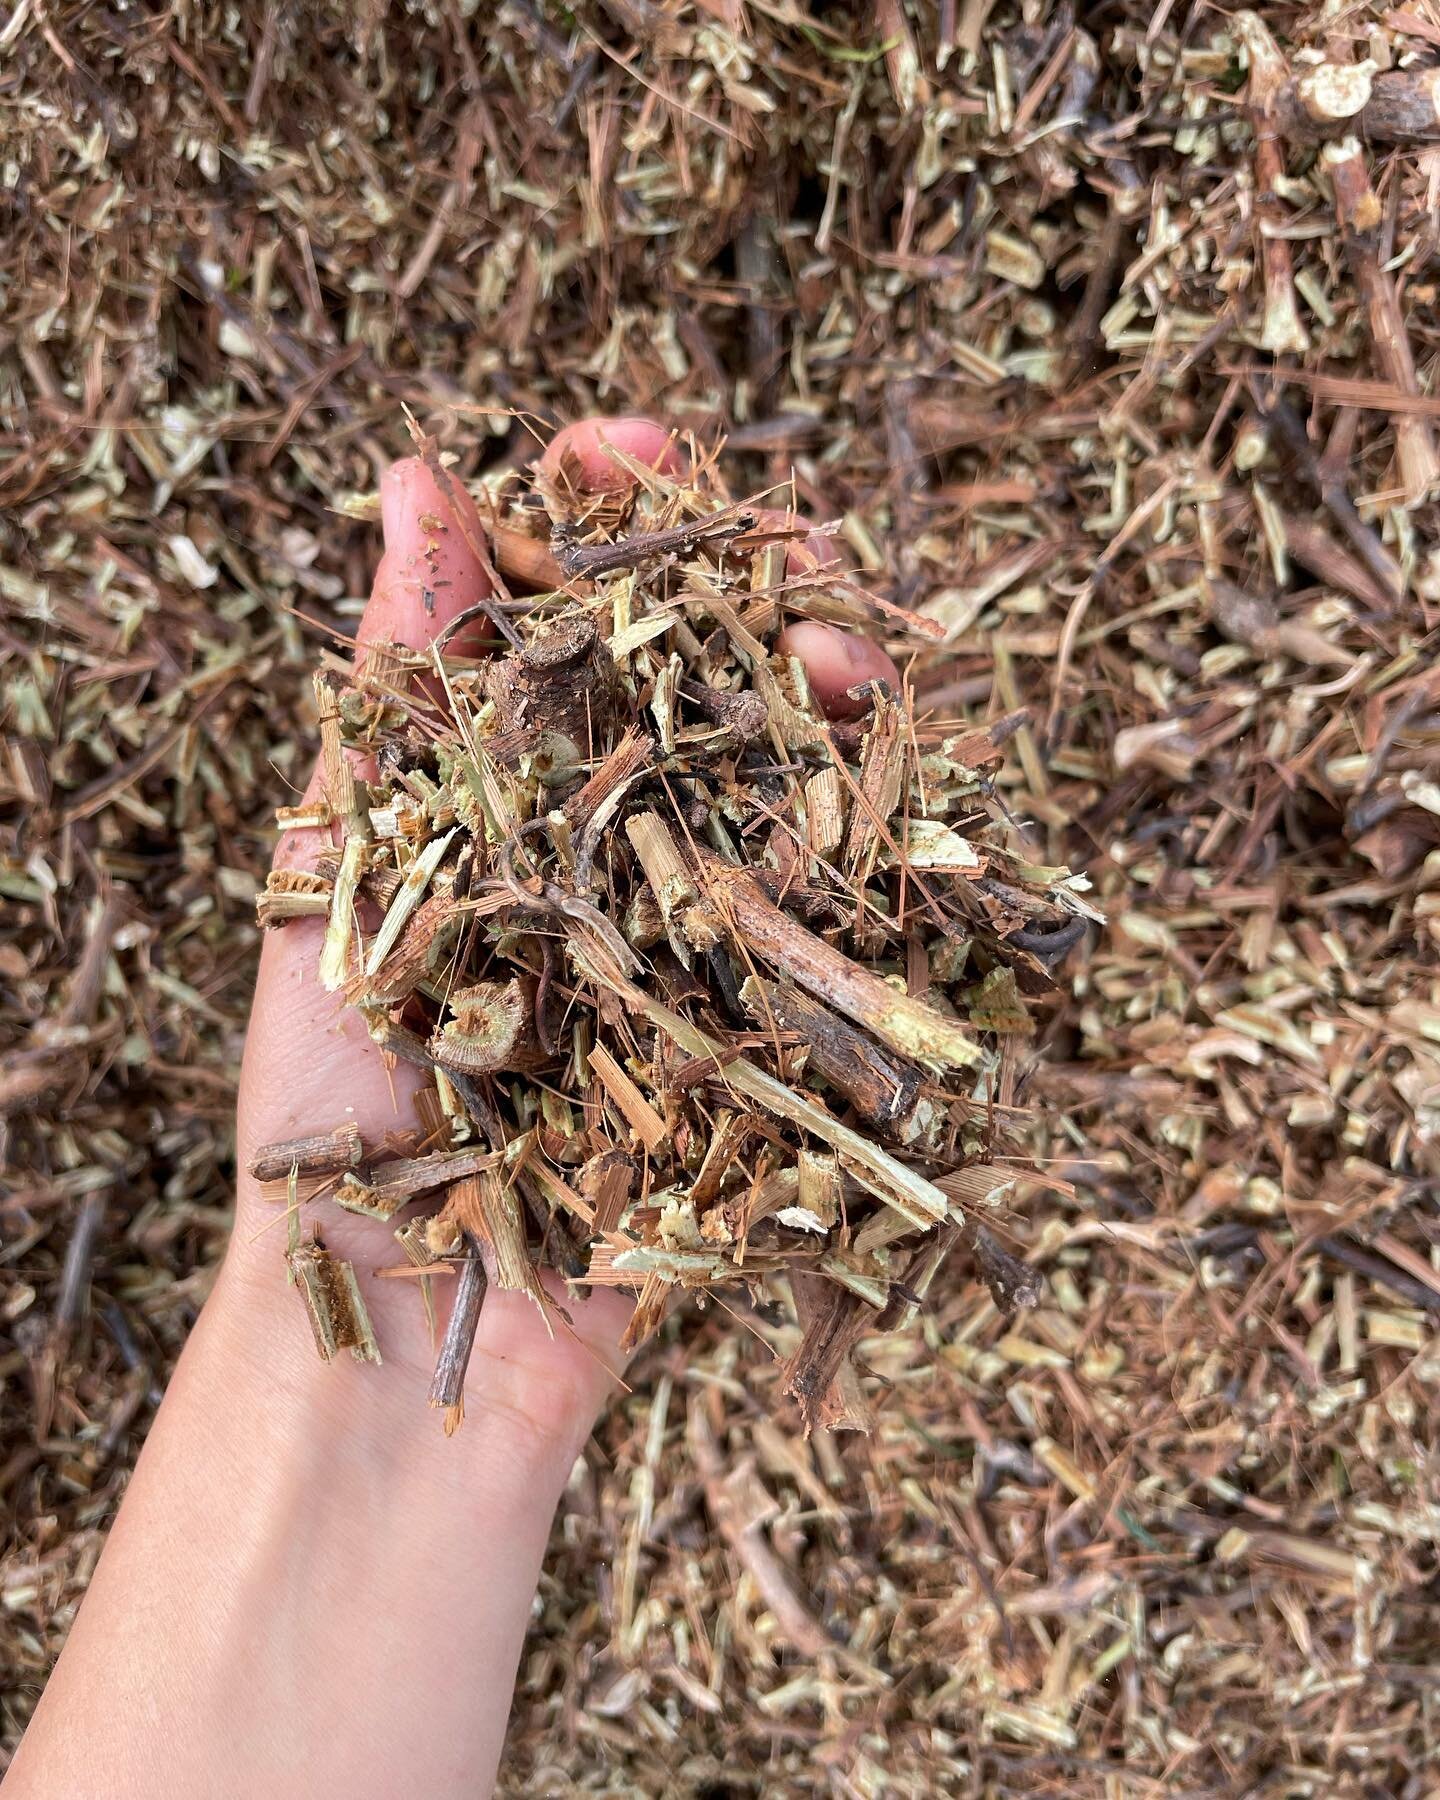 Closing out pruning with some very gratifying moments today. This year we piled up all our canes so we could mulch them  and use it as the carbon source for our hot compost. Mixed with manure from our paddocks, greens from the garden, spoilt hay and 